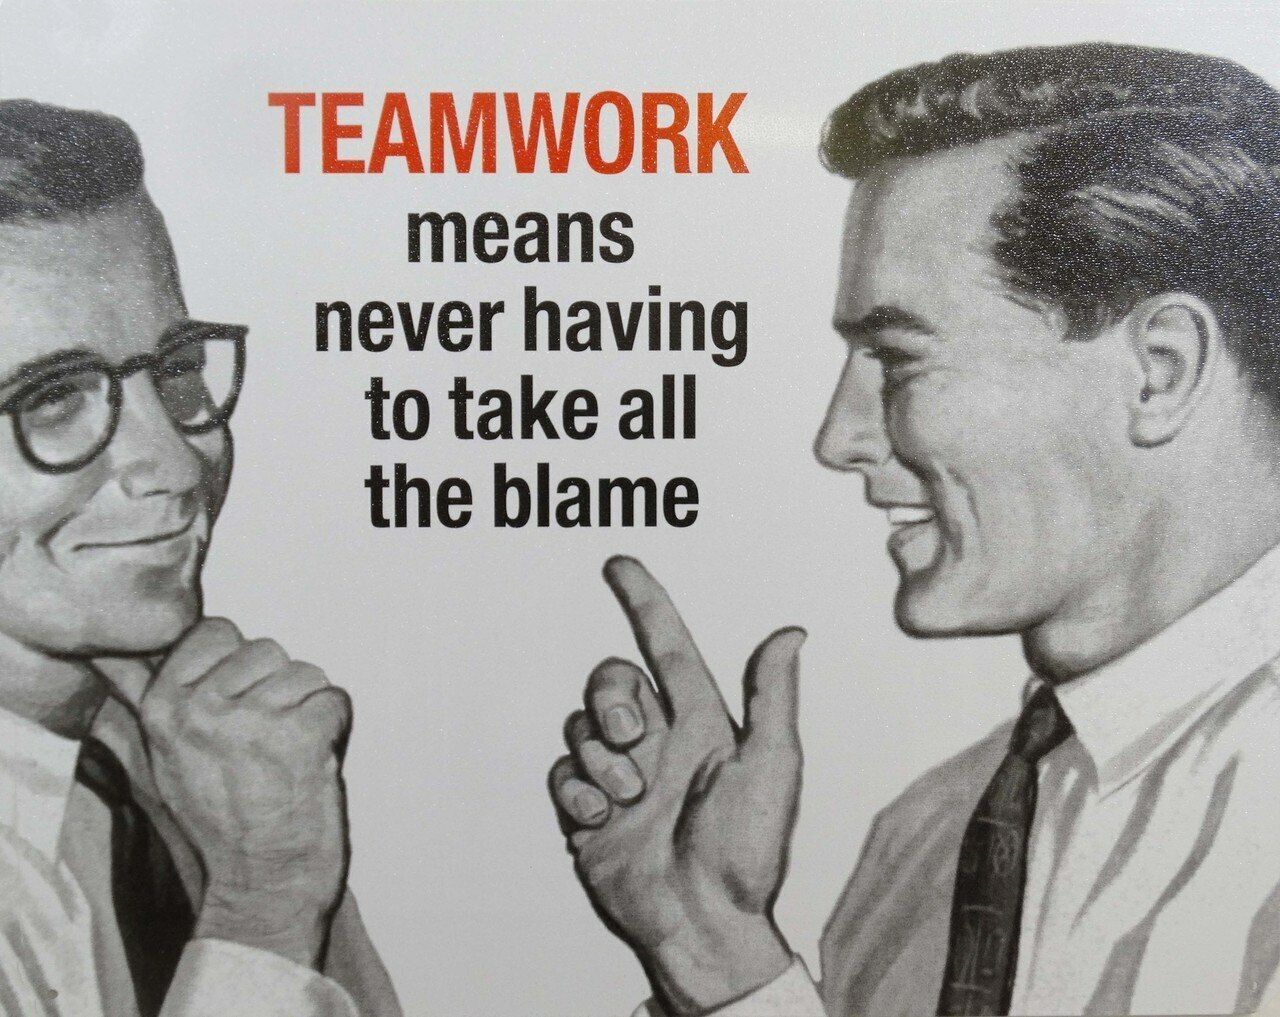 Teamwork Means Never Taking All the Blame, Work Office Mantra Humor Metal Sign